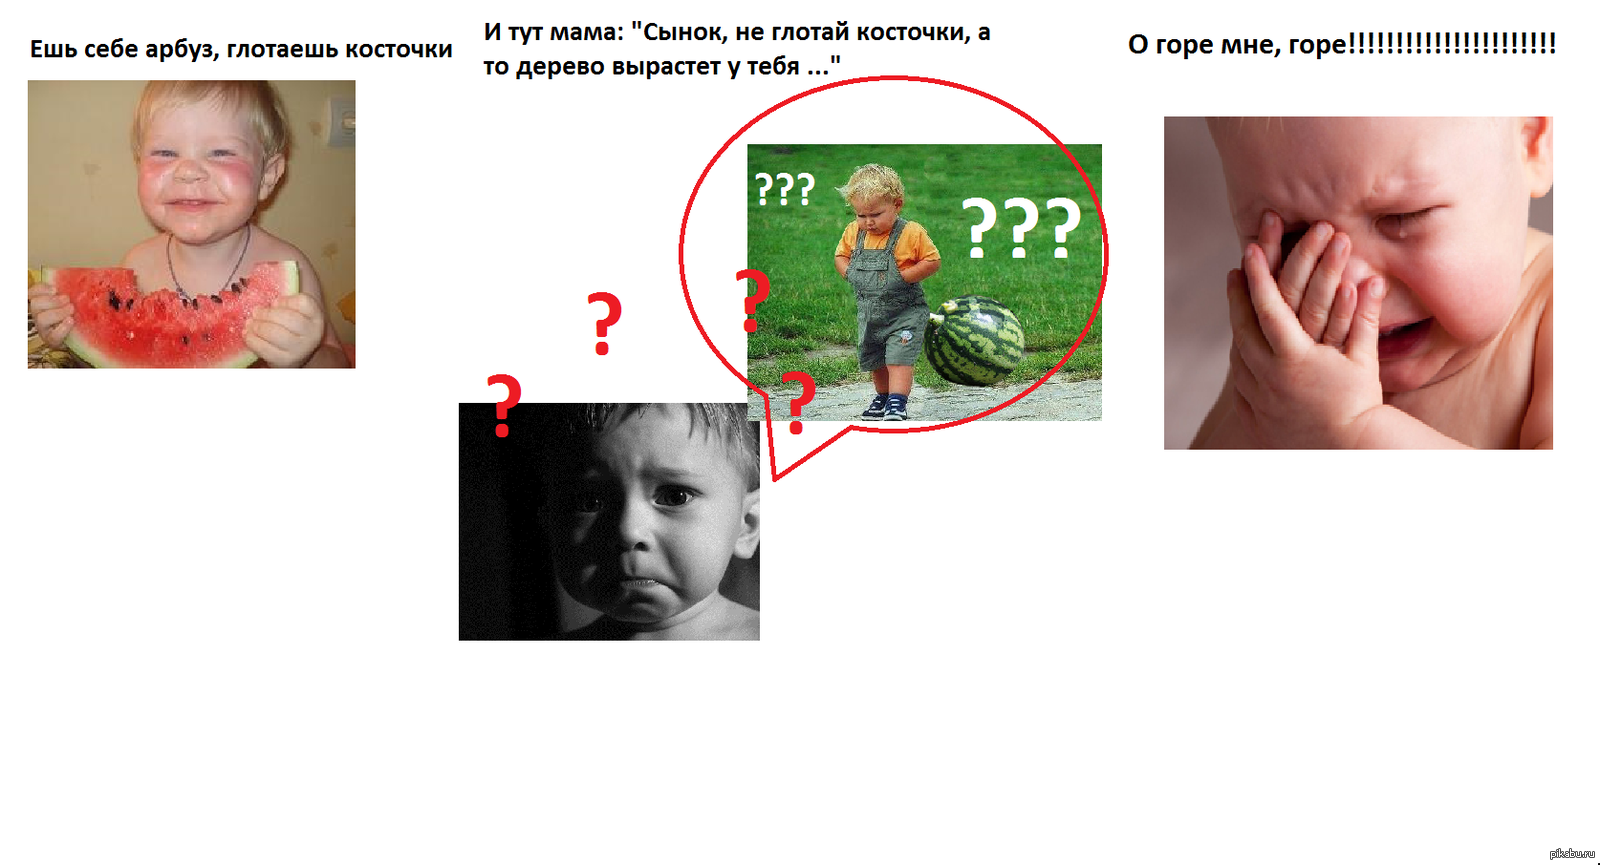 Were you scared as a child? )))))) - Children, Fearfully